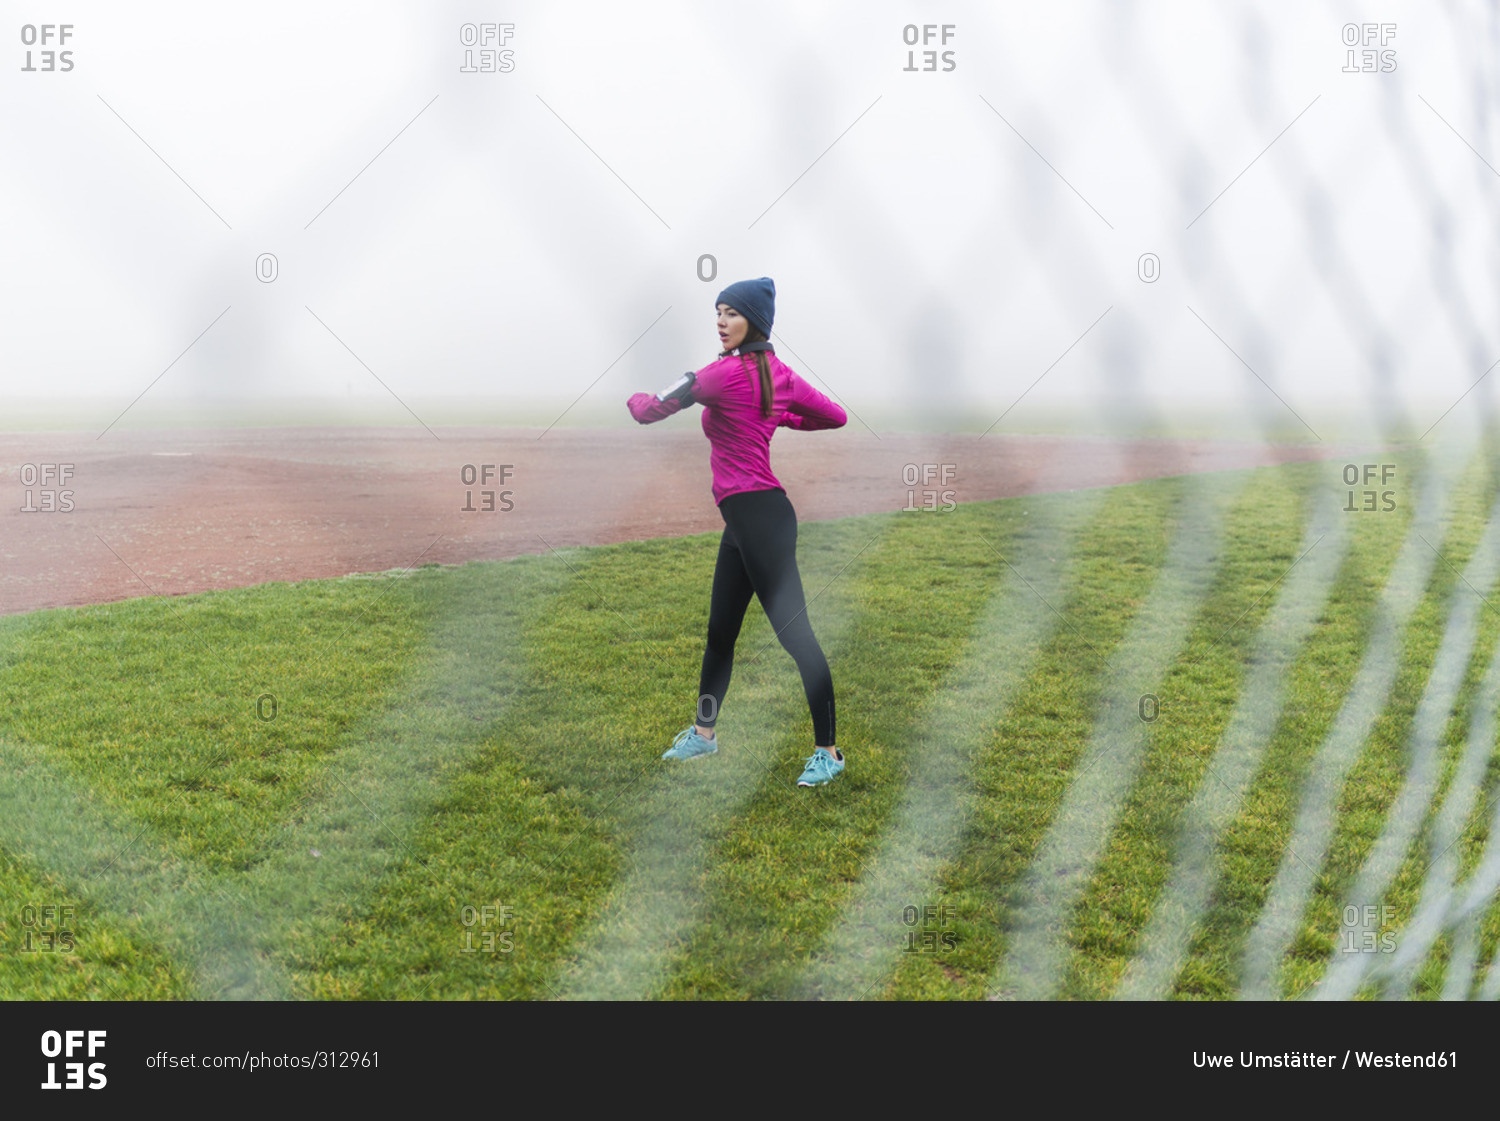 Young woman doing workout on a grass behind mesh wire fence